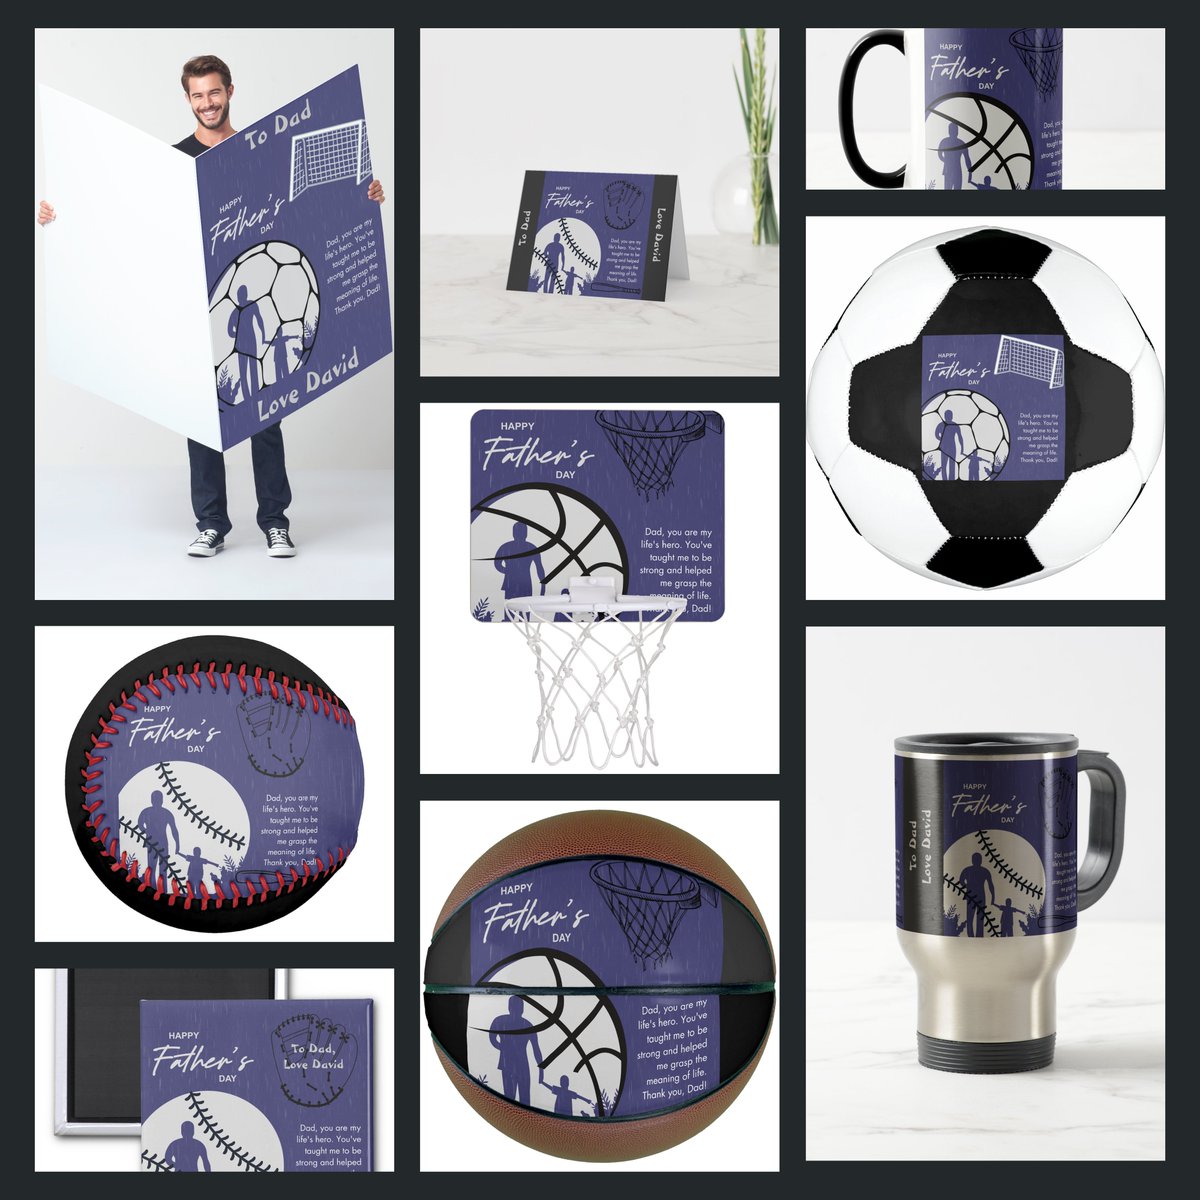 Check out my MVP Sports Father's Day Collection. #zazzlemade
zazzle.com/collections/mv… via @zazzle